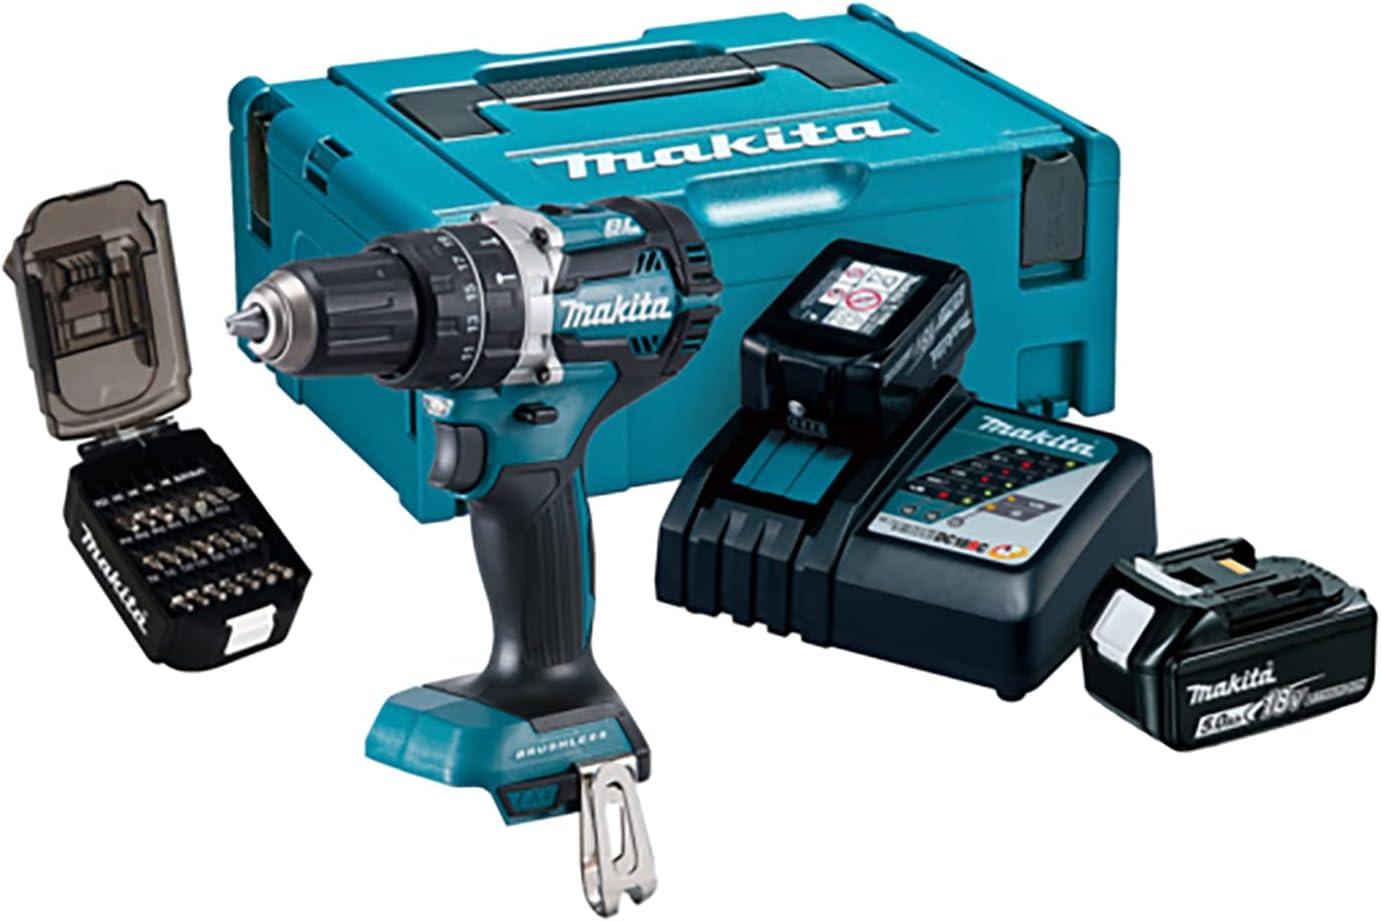 Makita DHP484TJX9 18V Li-ion LXT Brushless 50th Combi Drill Complete with 2 x 5.0 Ah Batteries, Charger and Screw Bit Set Supplied in a Makpac Case